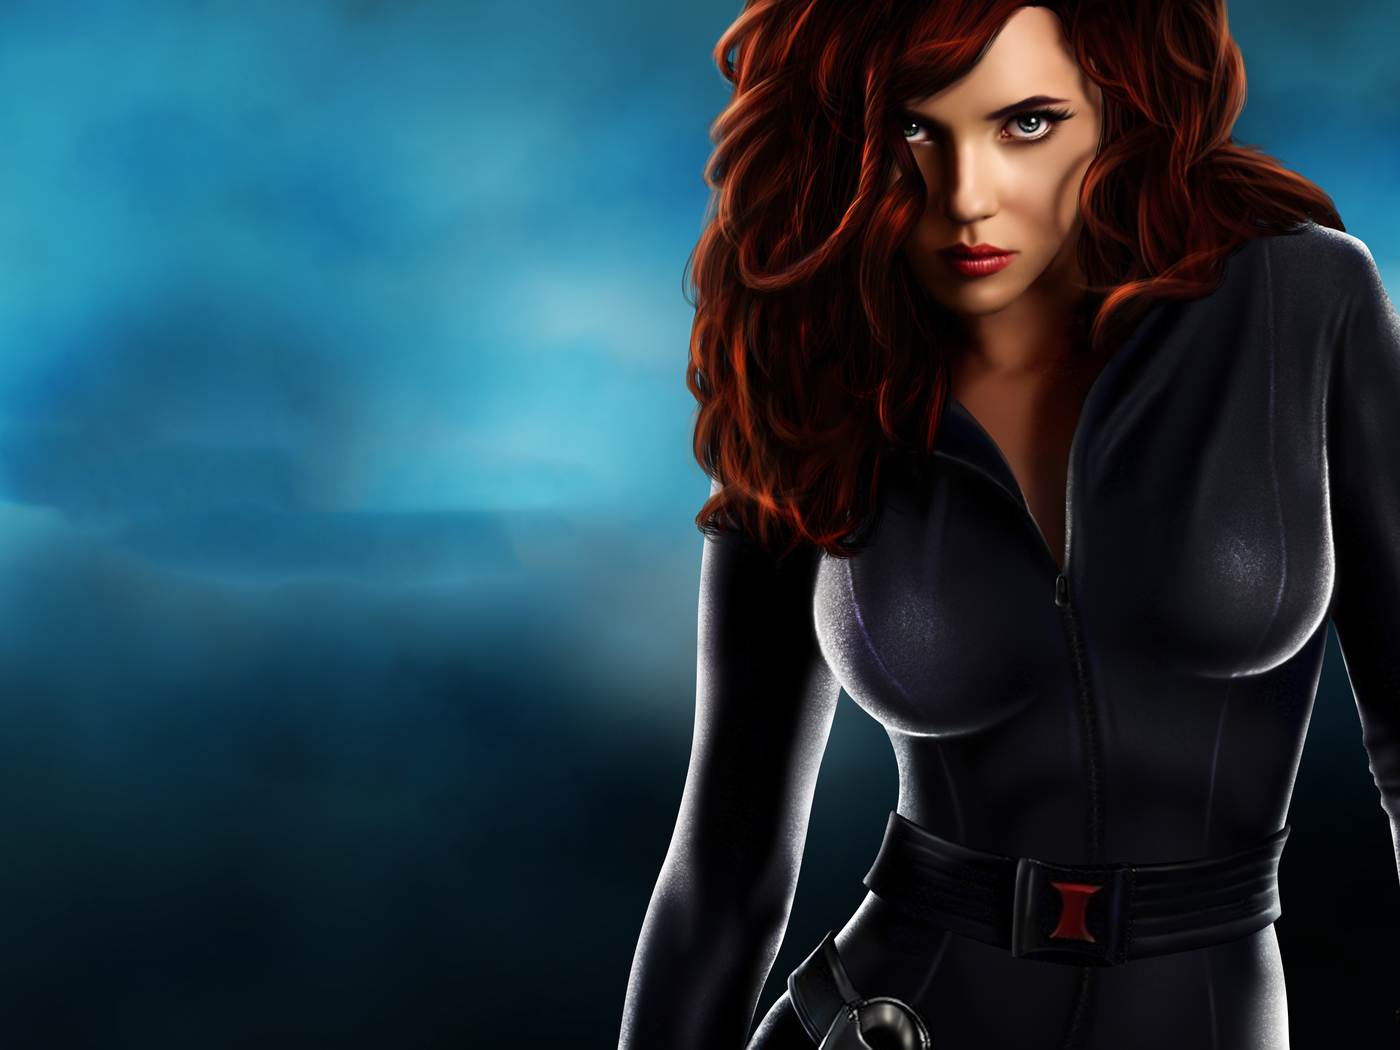 Black widow hot pictures - 🧡 Just scrolling through Pinterest and I came a...